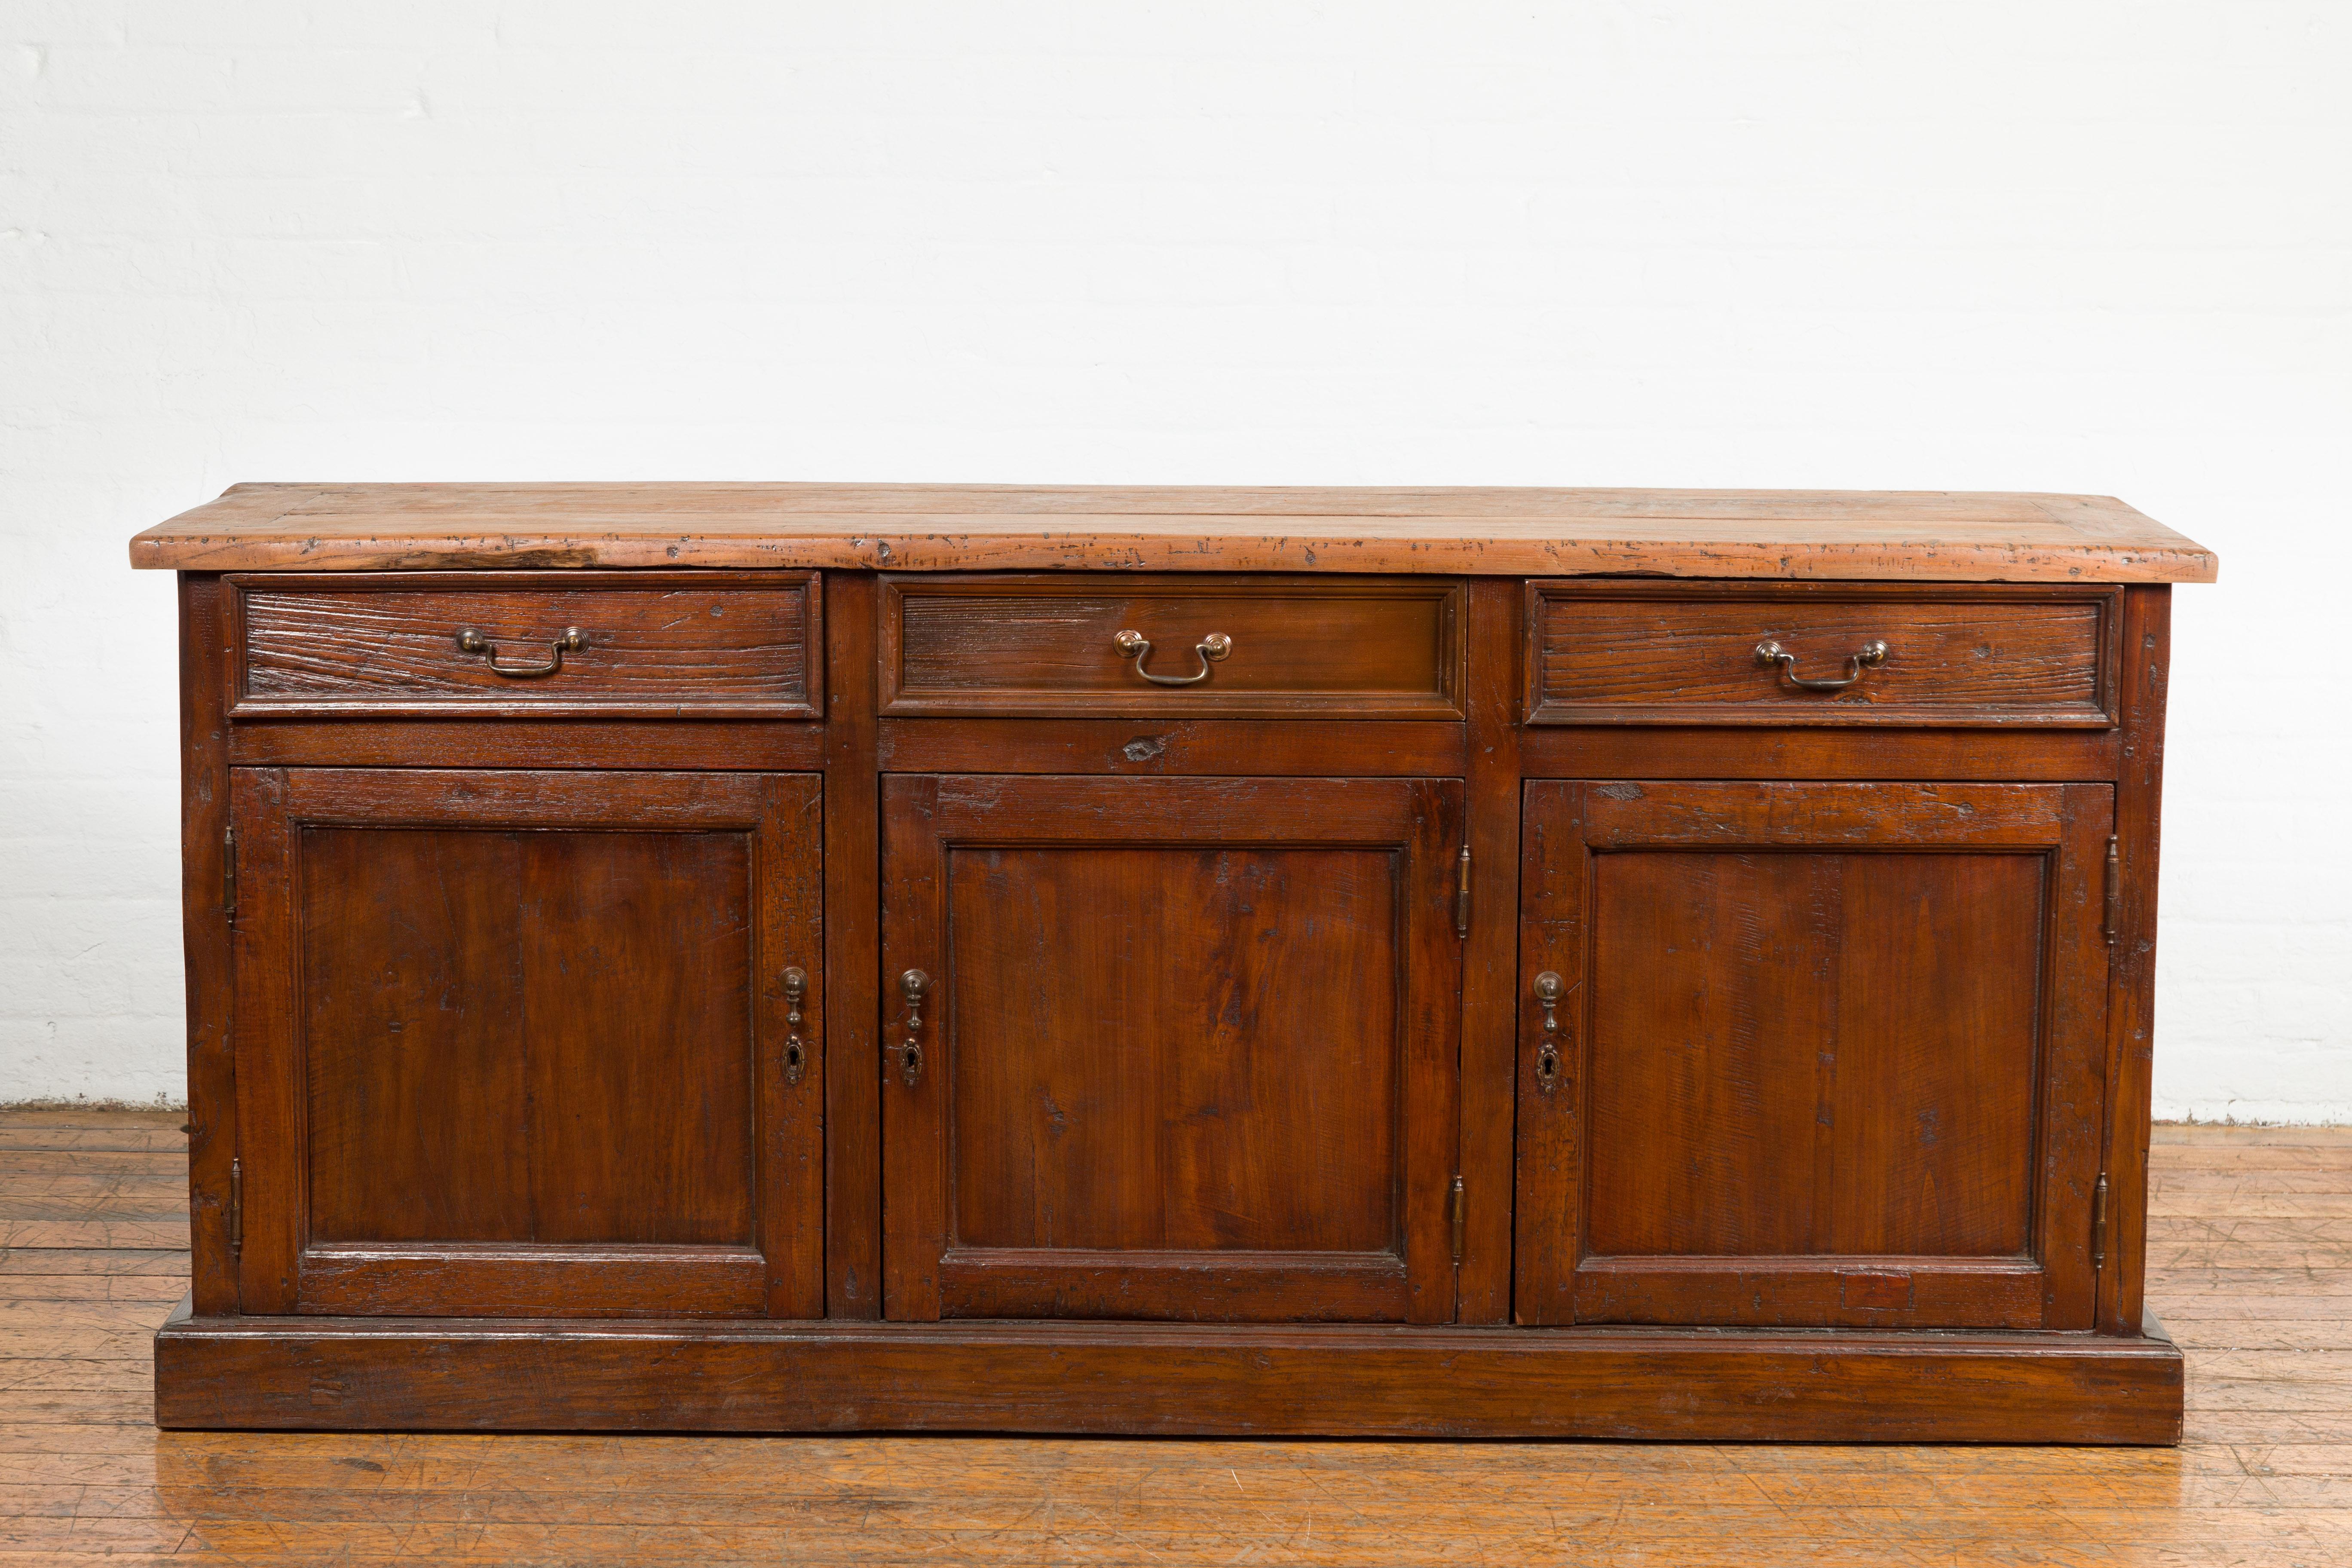 A vintage Indonesian wooden buffet from the mid 20th century with three drawers over three doors. Presenting a fusion of functionality and classic Indonesian aesthetics, this vintage wooden buffet from the mid-20th century features a pragmatic